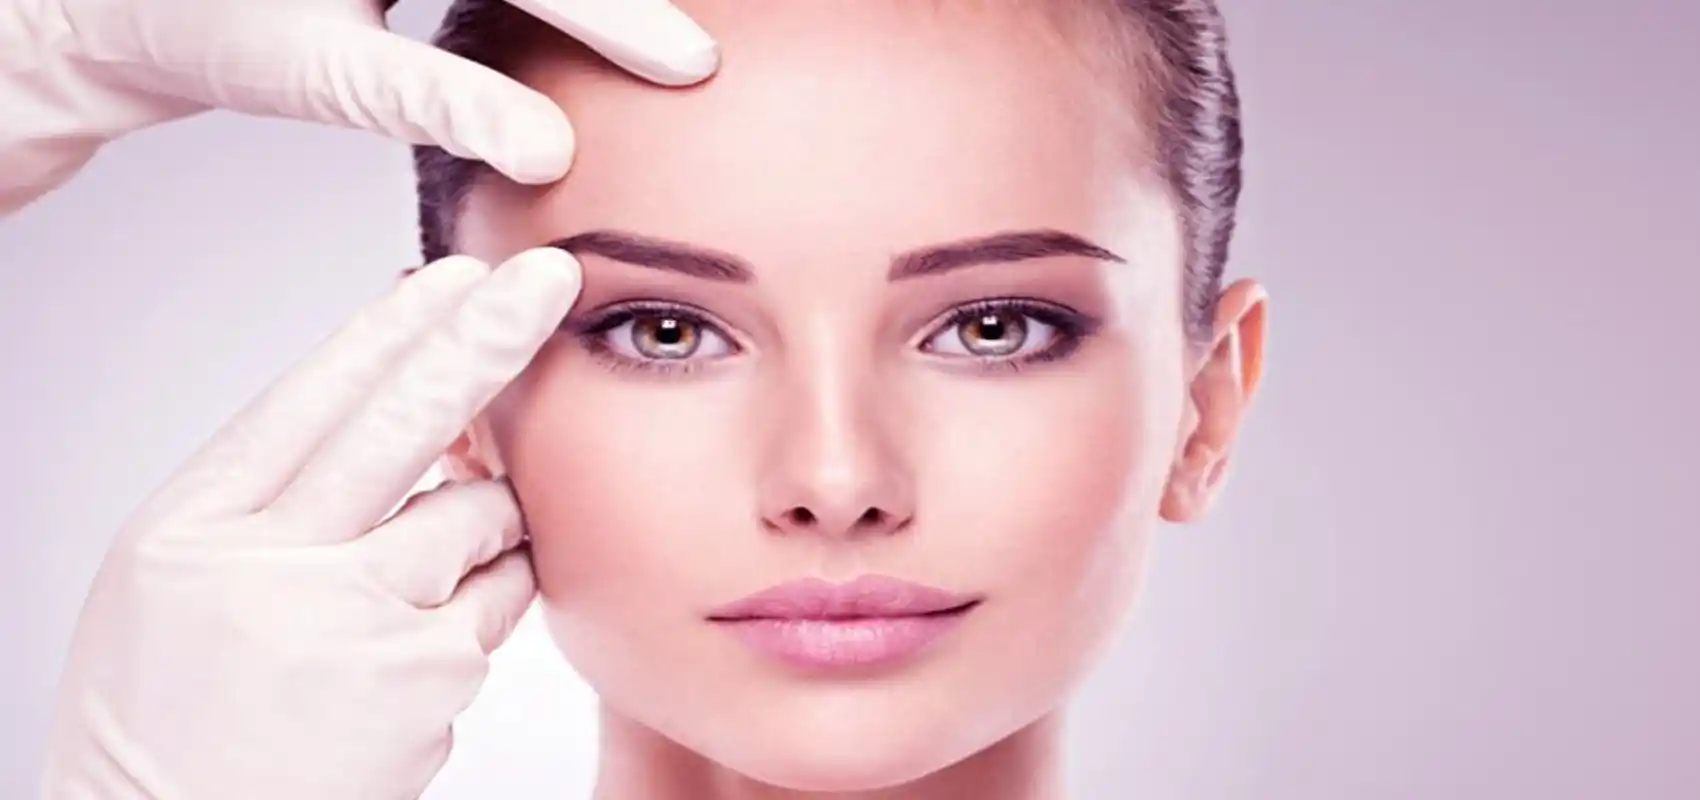 Blepharoplasty and Brow lift are the two surgeries we have discussed